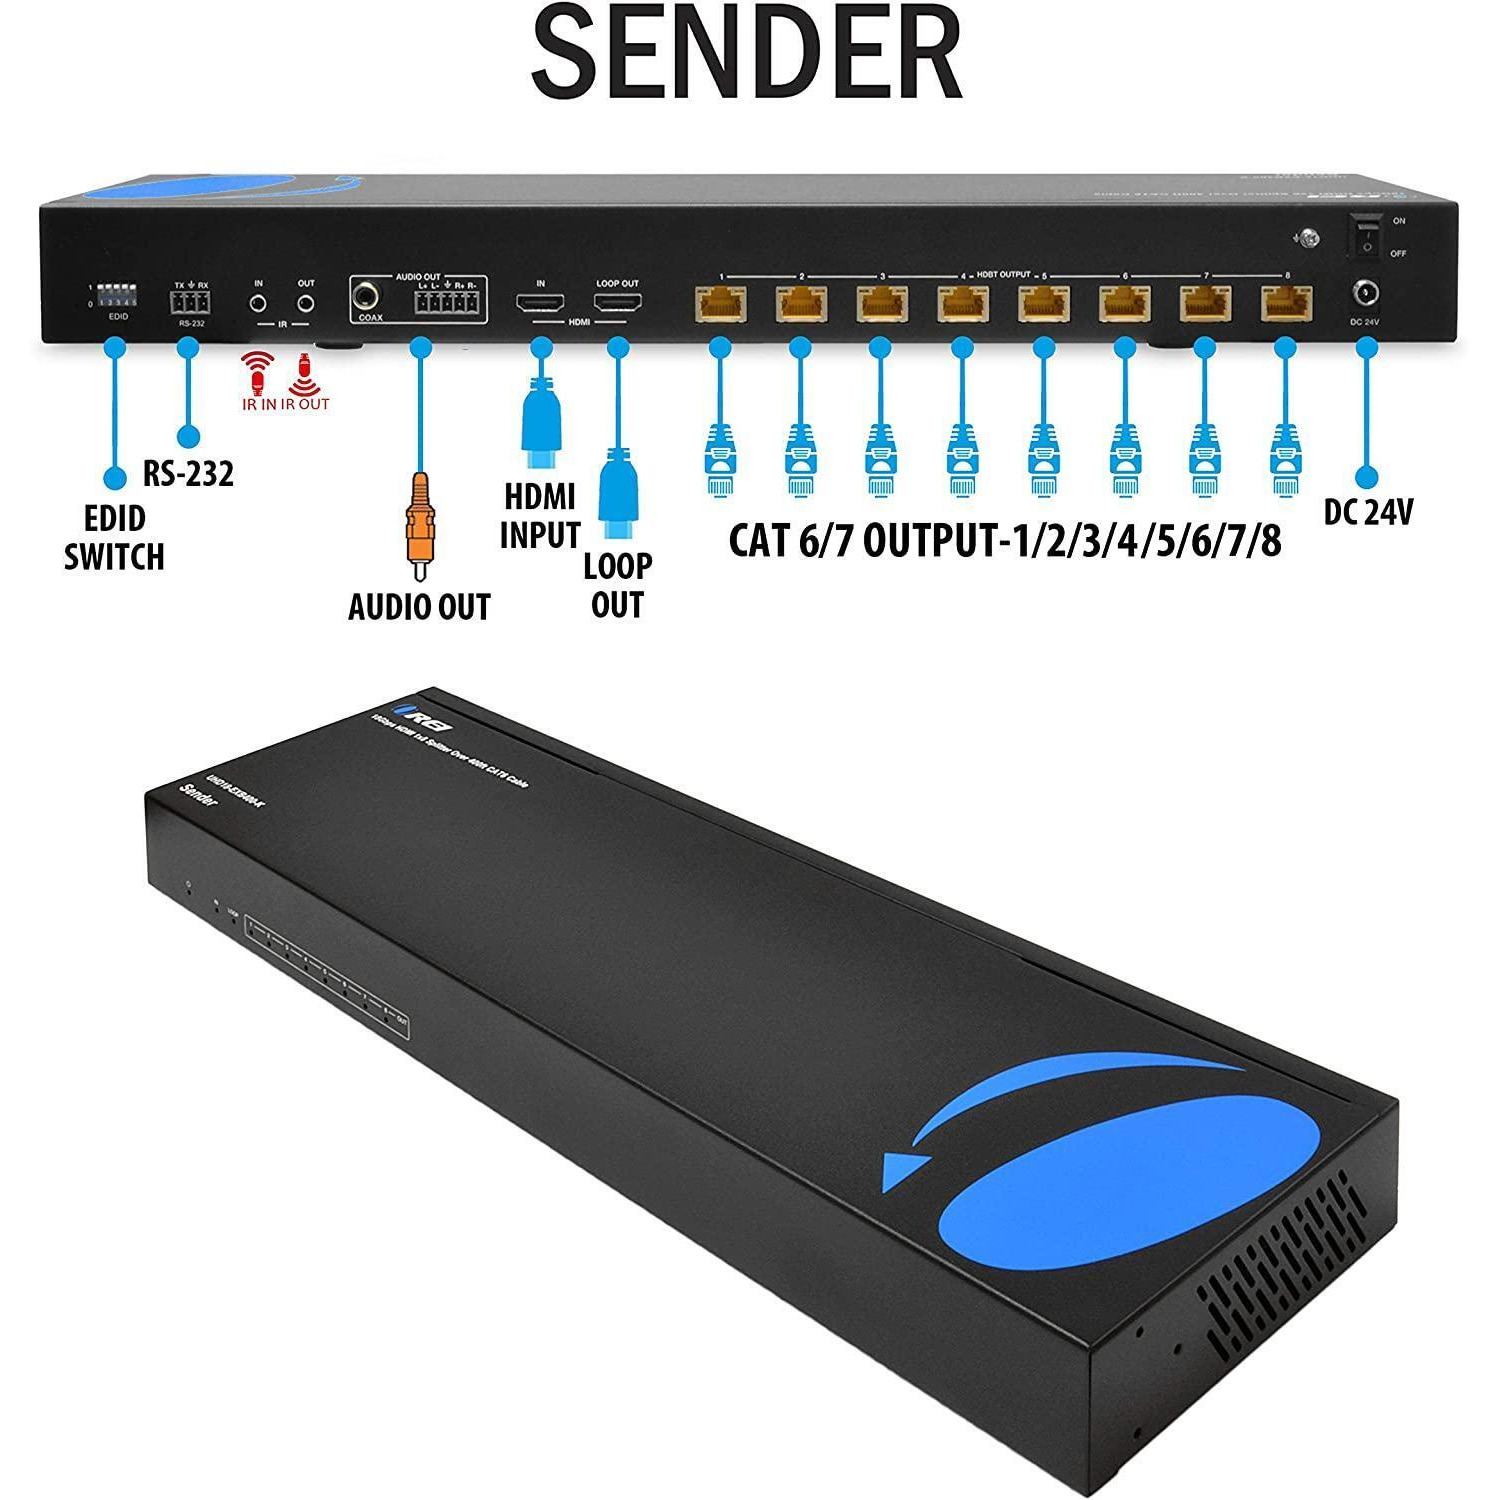 1x8 HDMI Extender Splitter HDBaseT 4K by OREI Multiple Over Single Cable CAT6/7 4K@60Hz 4:4:4 HDCP 2.2 with IR Remote EDID Management, HDR - Up to 400 Ft - Loop Out - Low Latency - Full Support alternate image